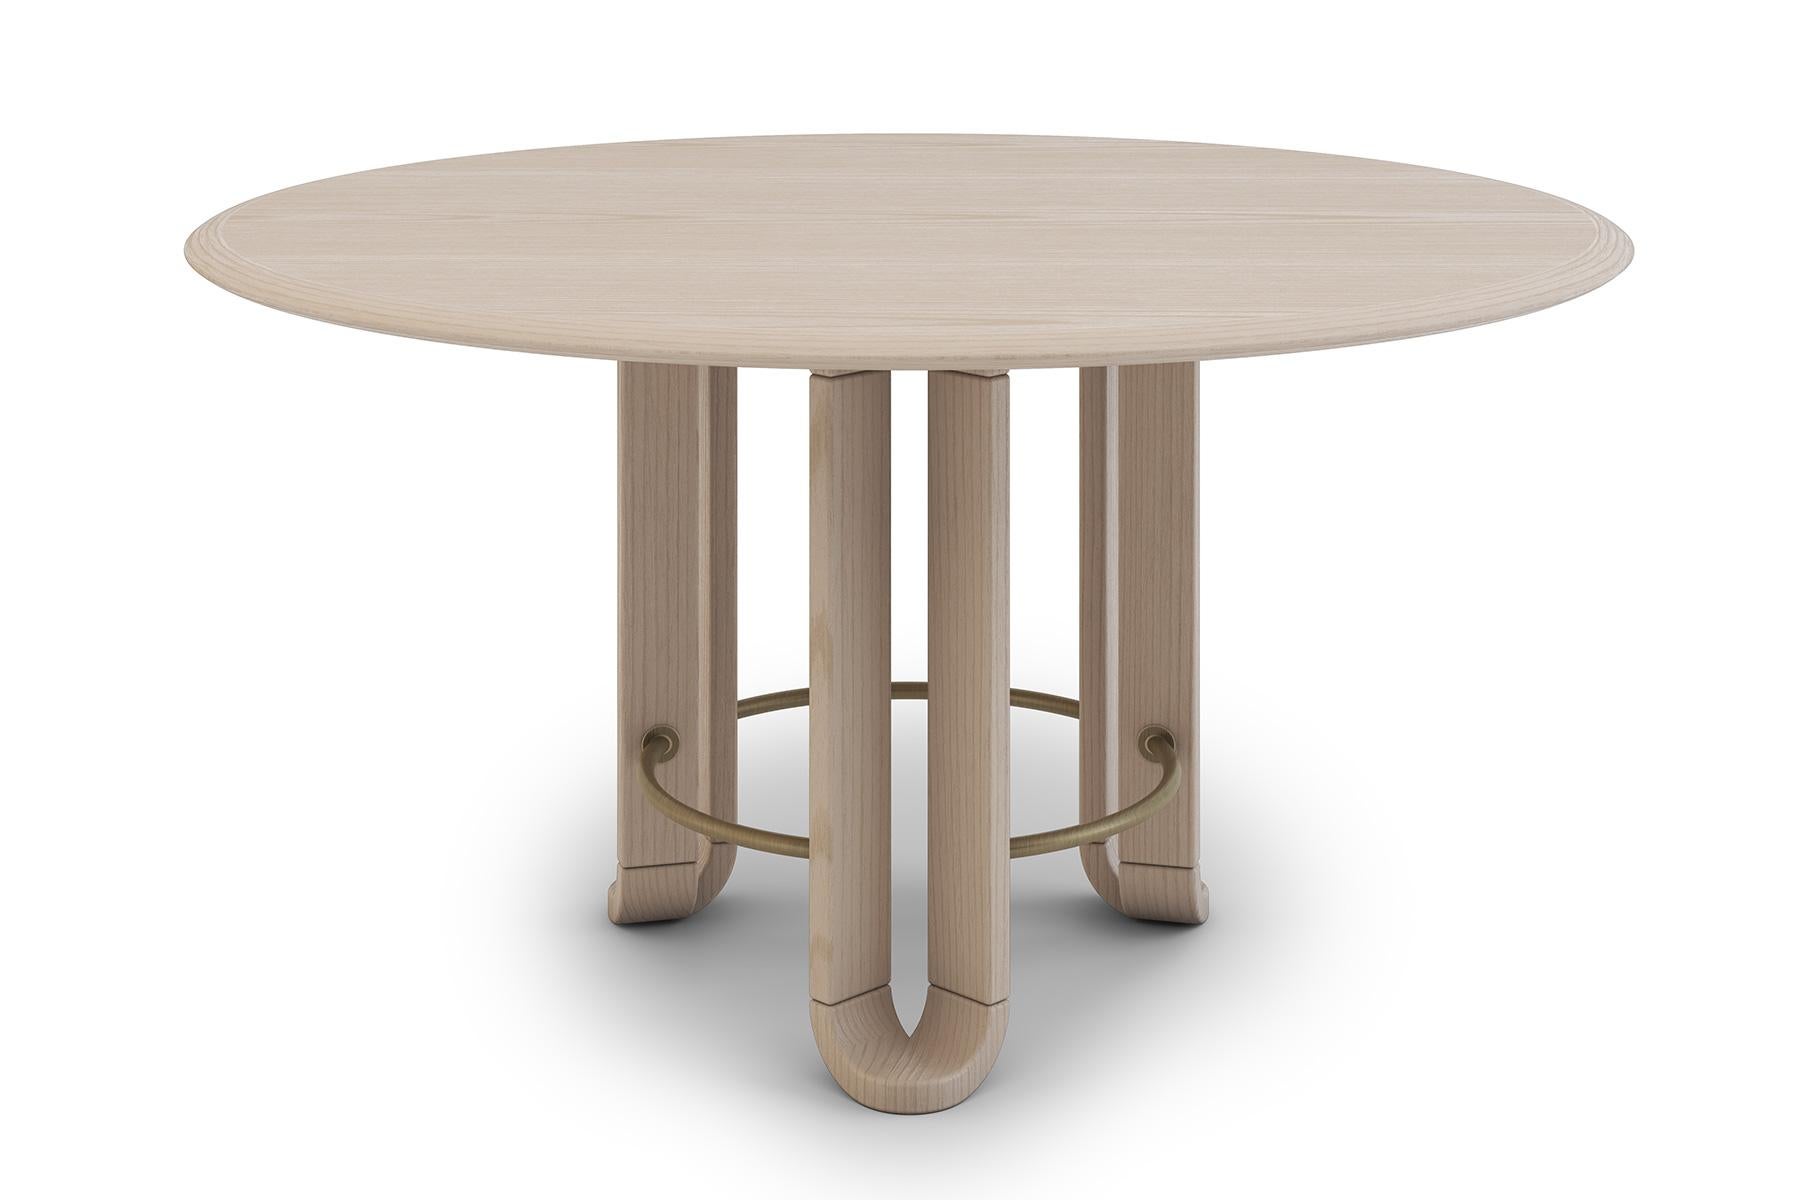 Modern Dining Table, Round, Walnut with Antique Plated Metal Details For Sale